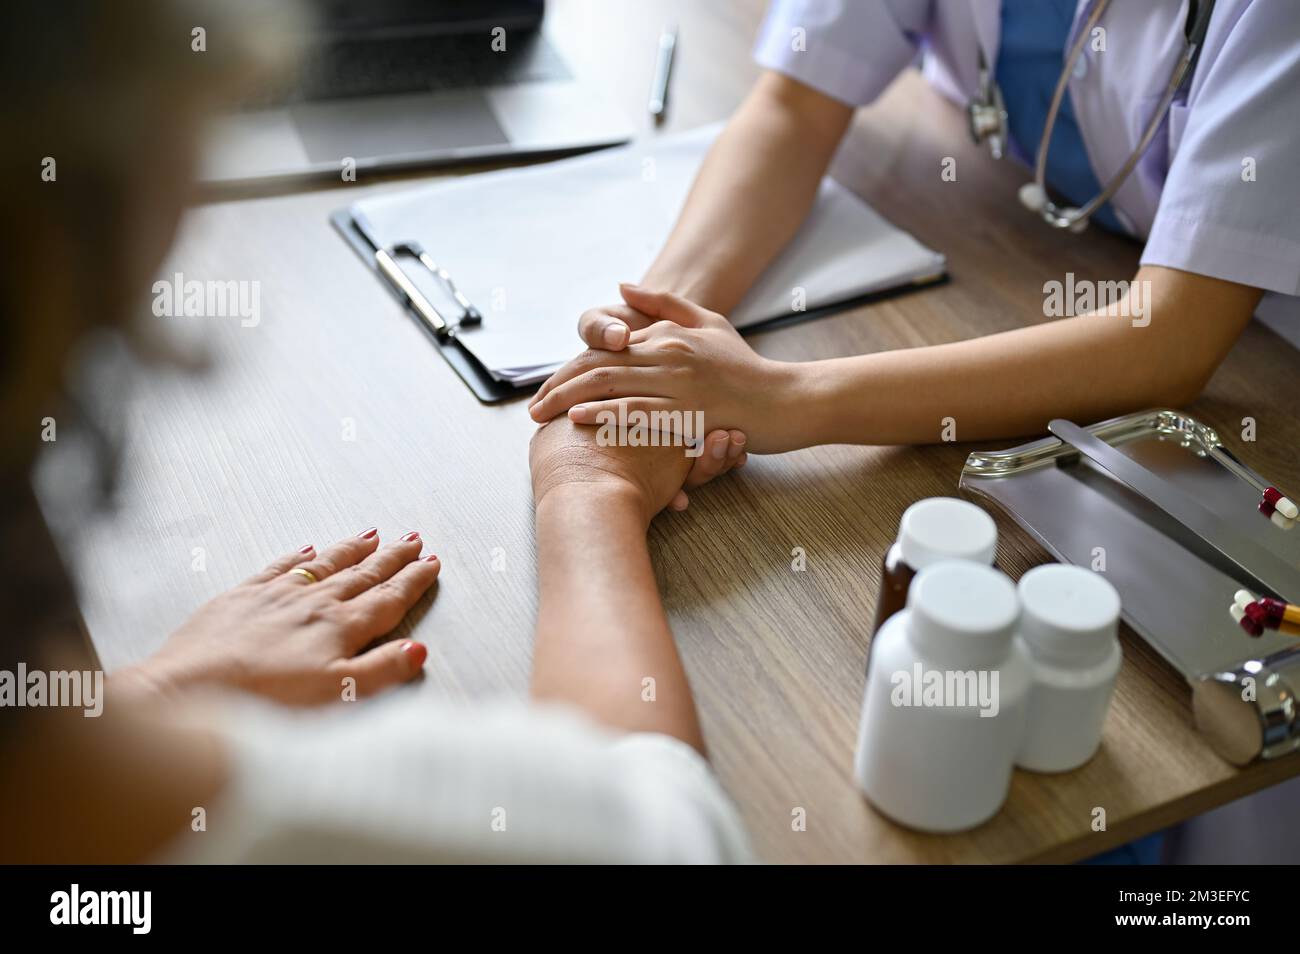 A female doctor holding her patient's hands on the table while discussing the treatment plan. cropped and close-up image Stock Photo